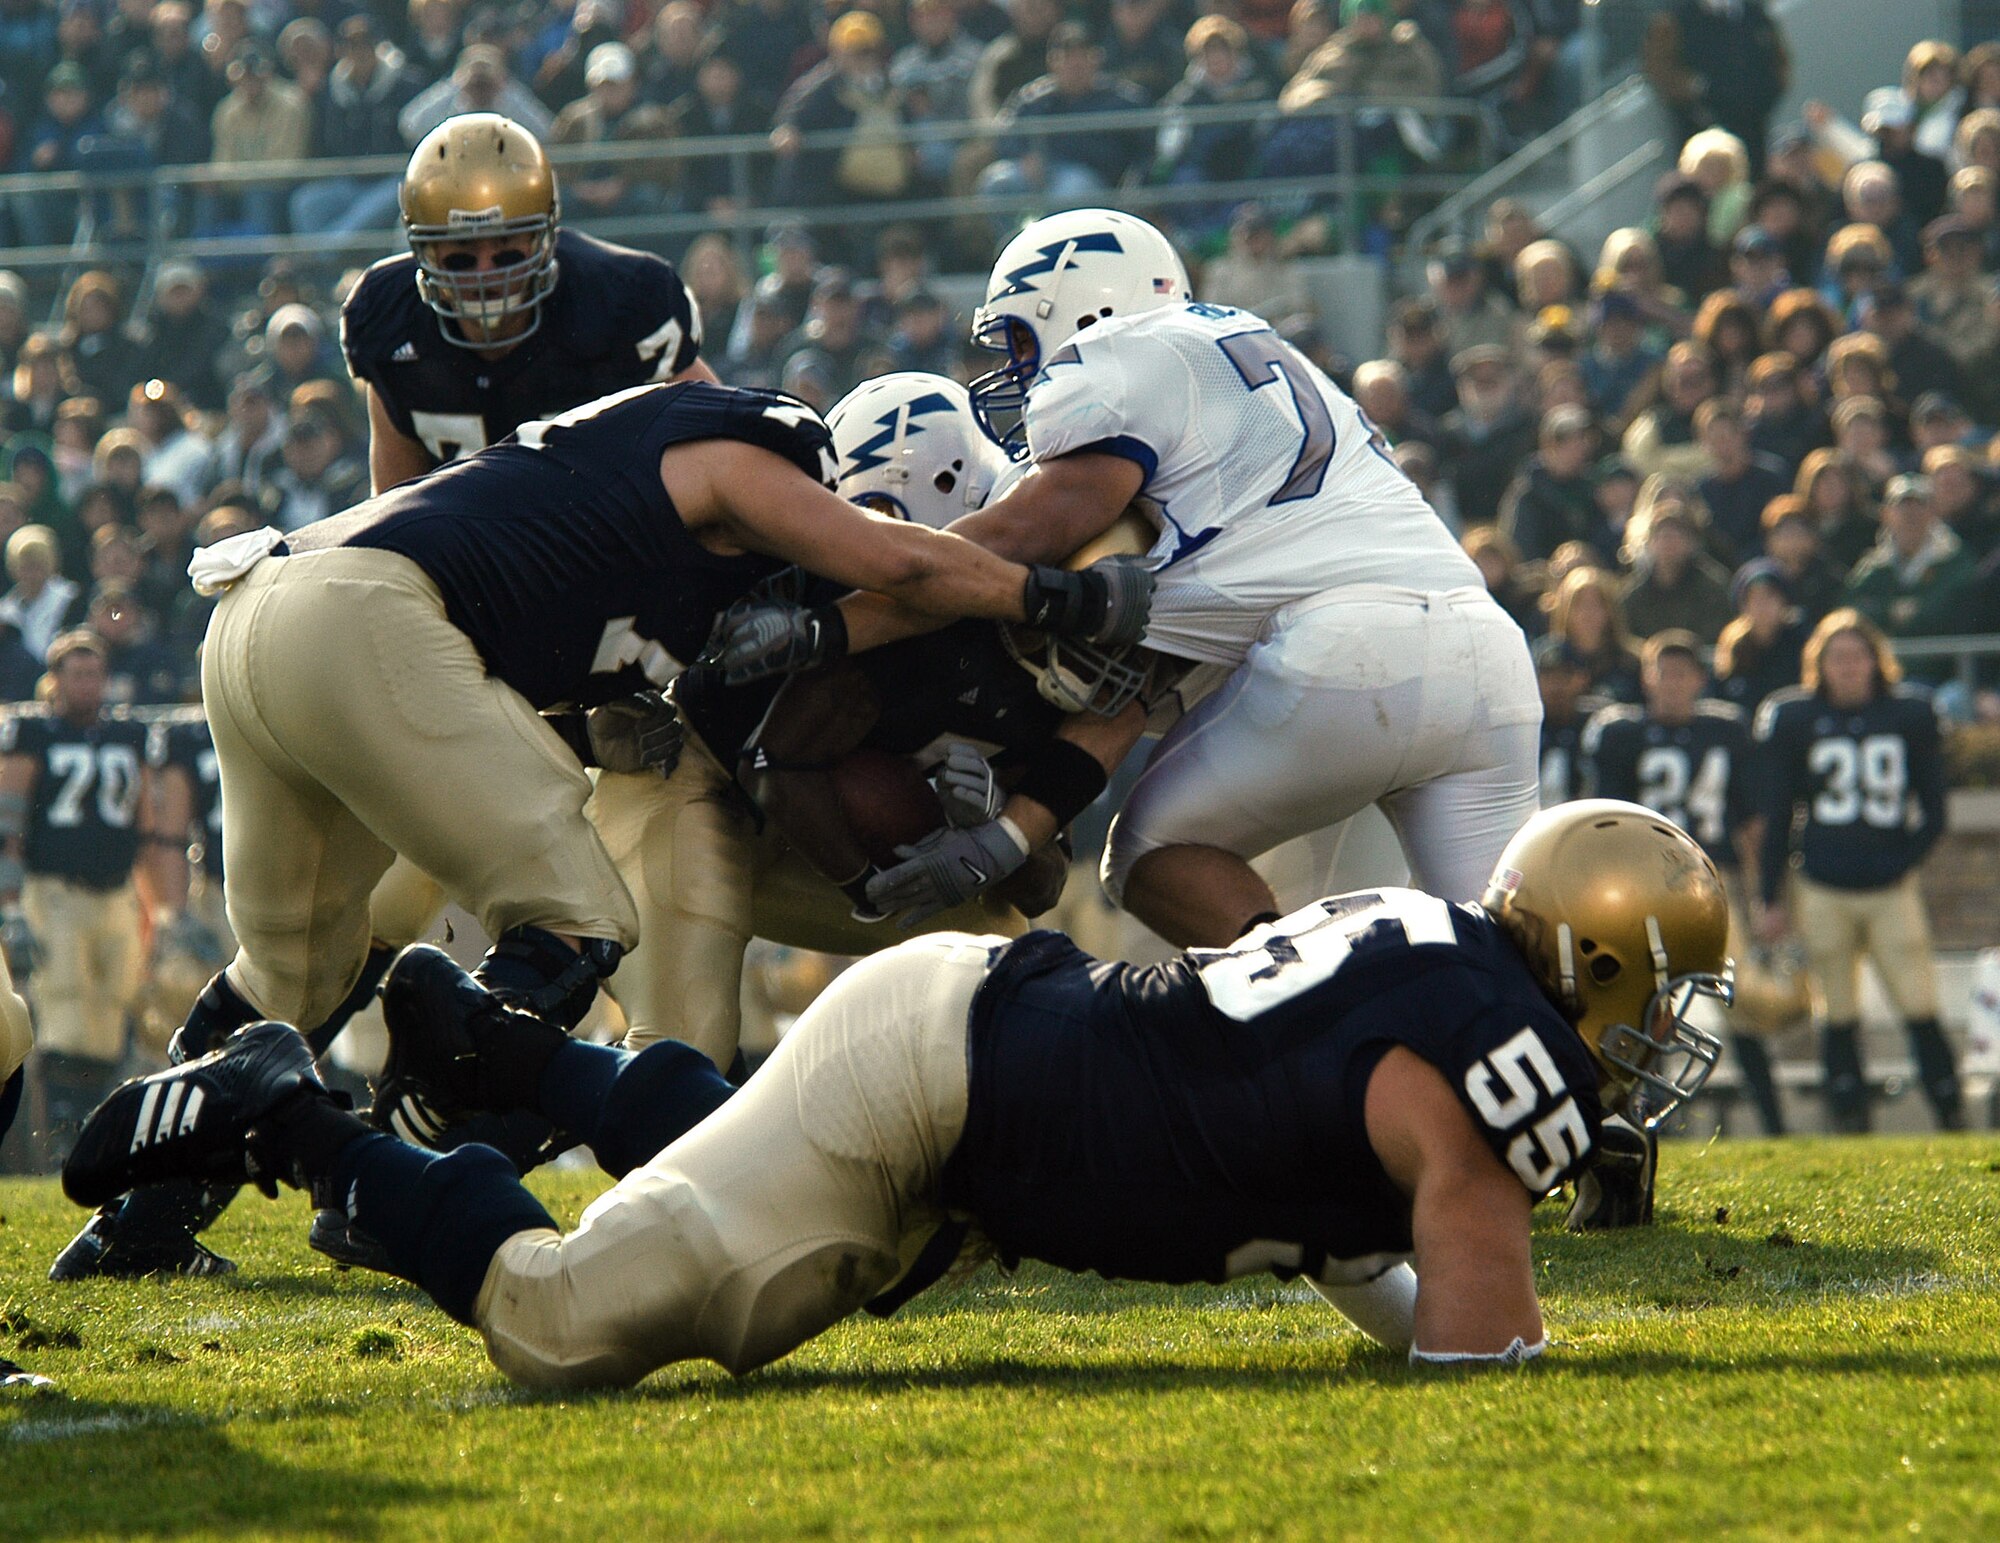 U.S. Air Force Academy Falcon nose guard Stephen Larsen has his jersey grabbed by Fighting Irish offensive lineman Michael Turkovich as Larsen and company swarm around an Irish running back during Air Force's 41-24 win Nov. 10 at Notre Dame Stadium in Indiana. (U.S. Air Force photo/Staff Sgt. Monte Volk) 
